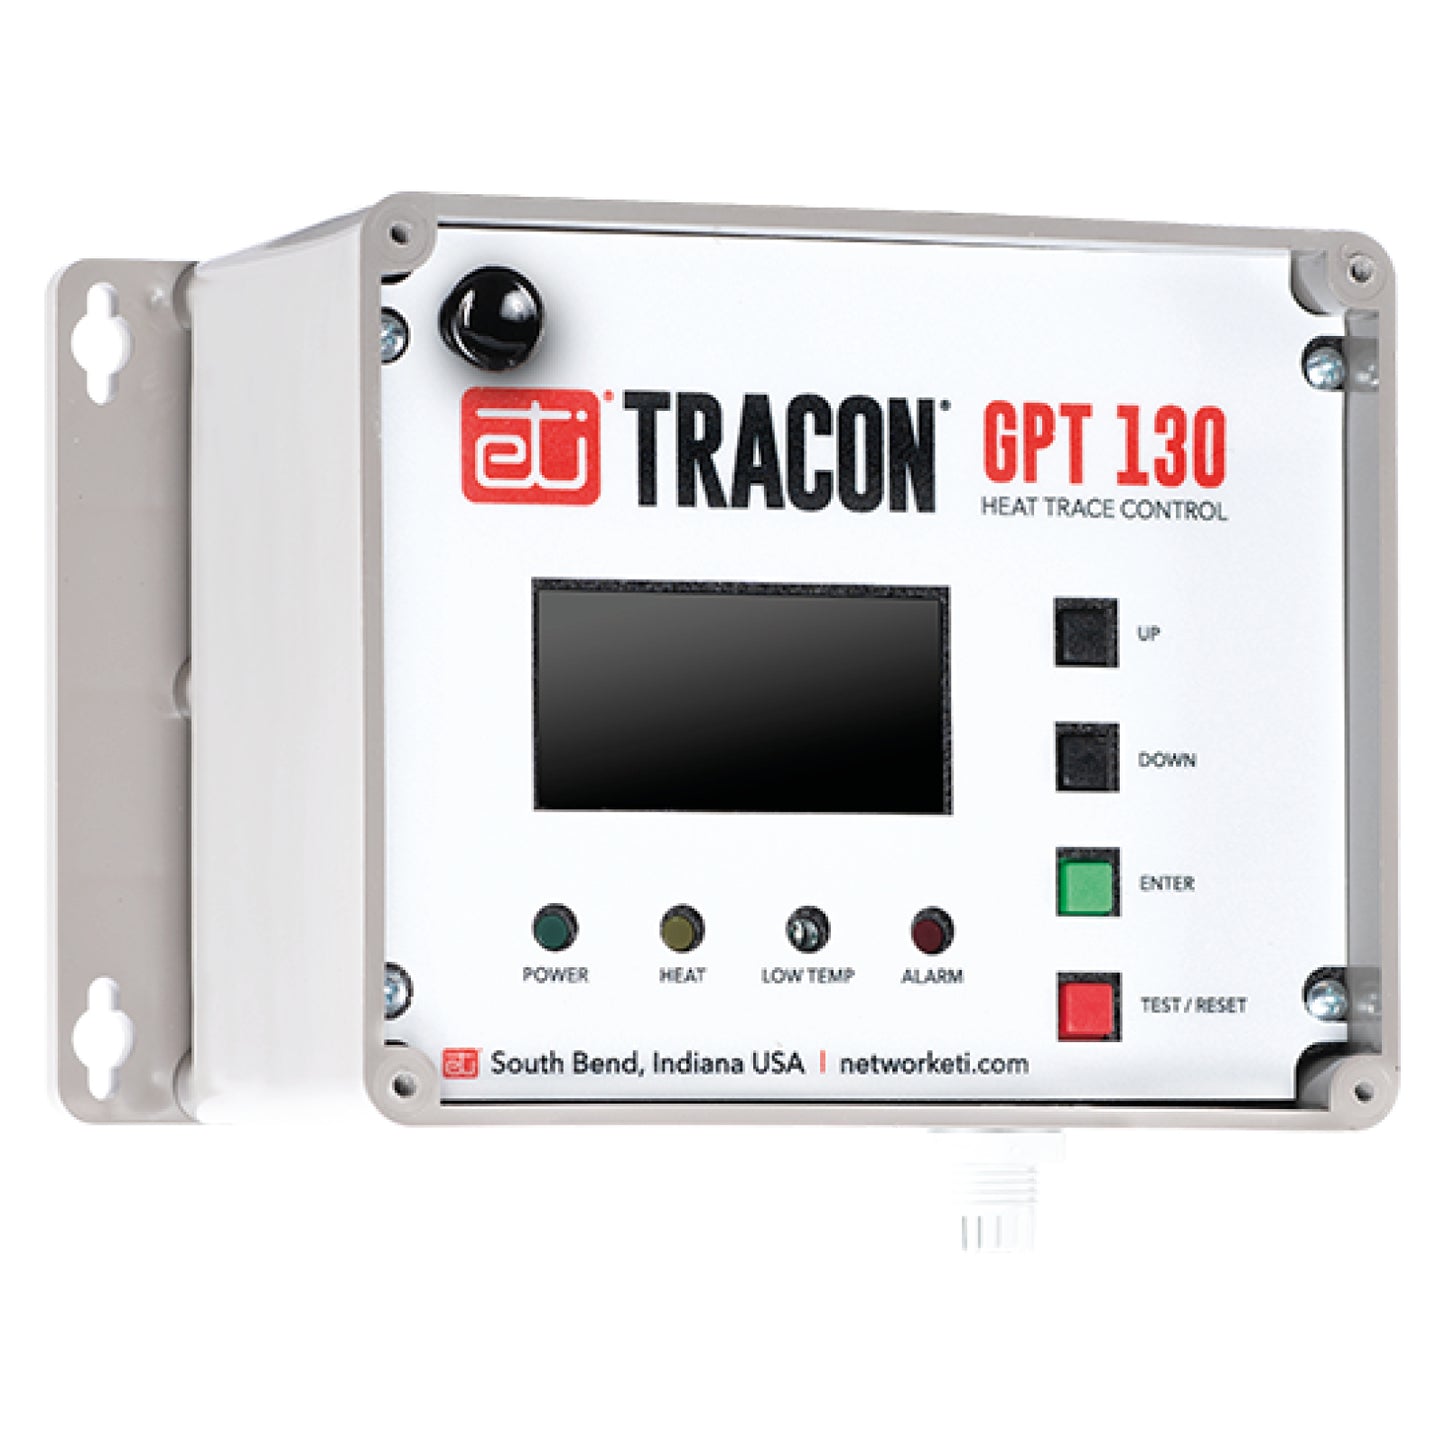 Tracon GPT-130 (25170) One zone Heat–Trace Temperature Controller Thermostat